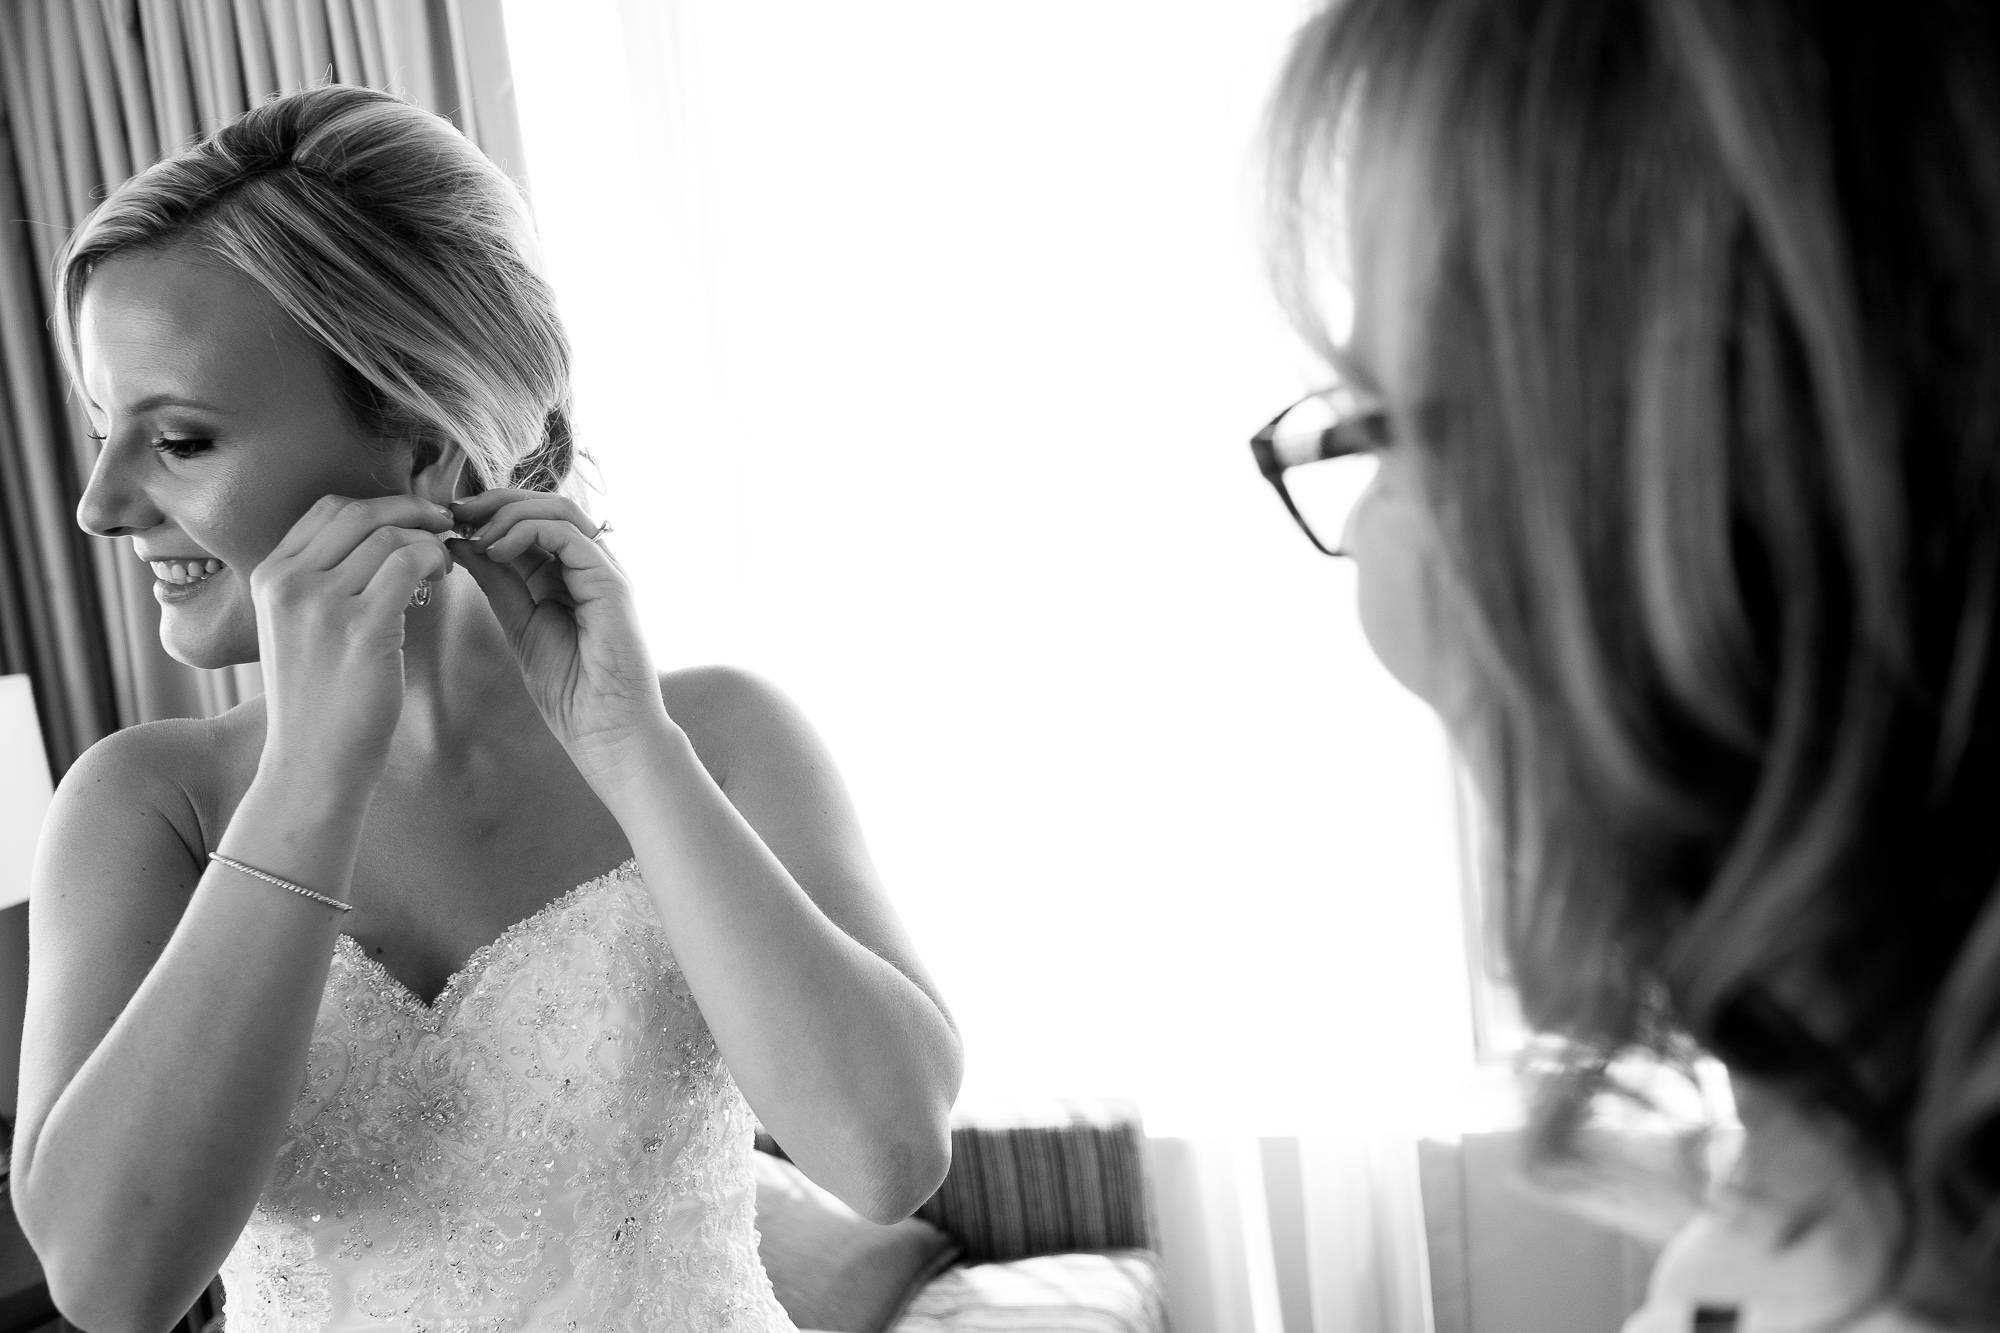  Danielle adjusts her earring as she gets ready for her wedding ceremony at the One King West Hotel in Toronto. 